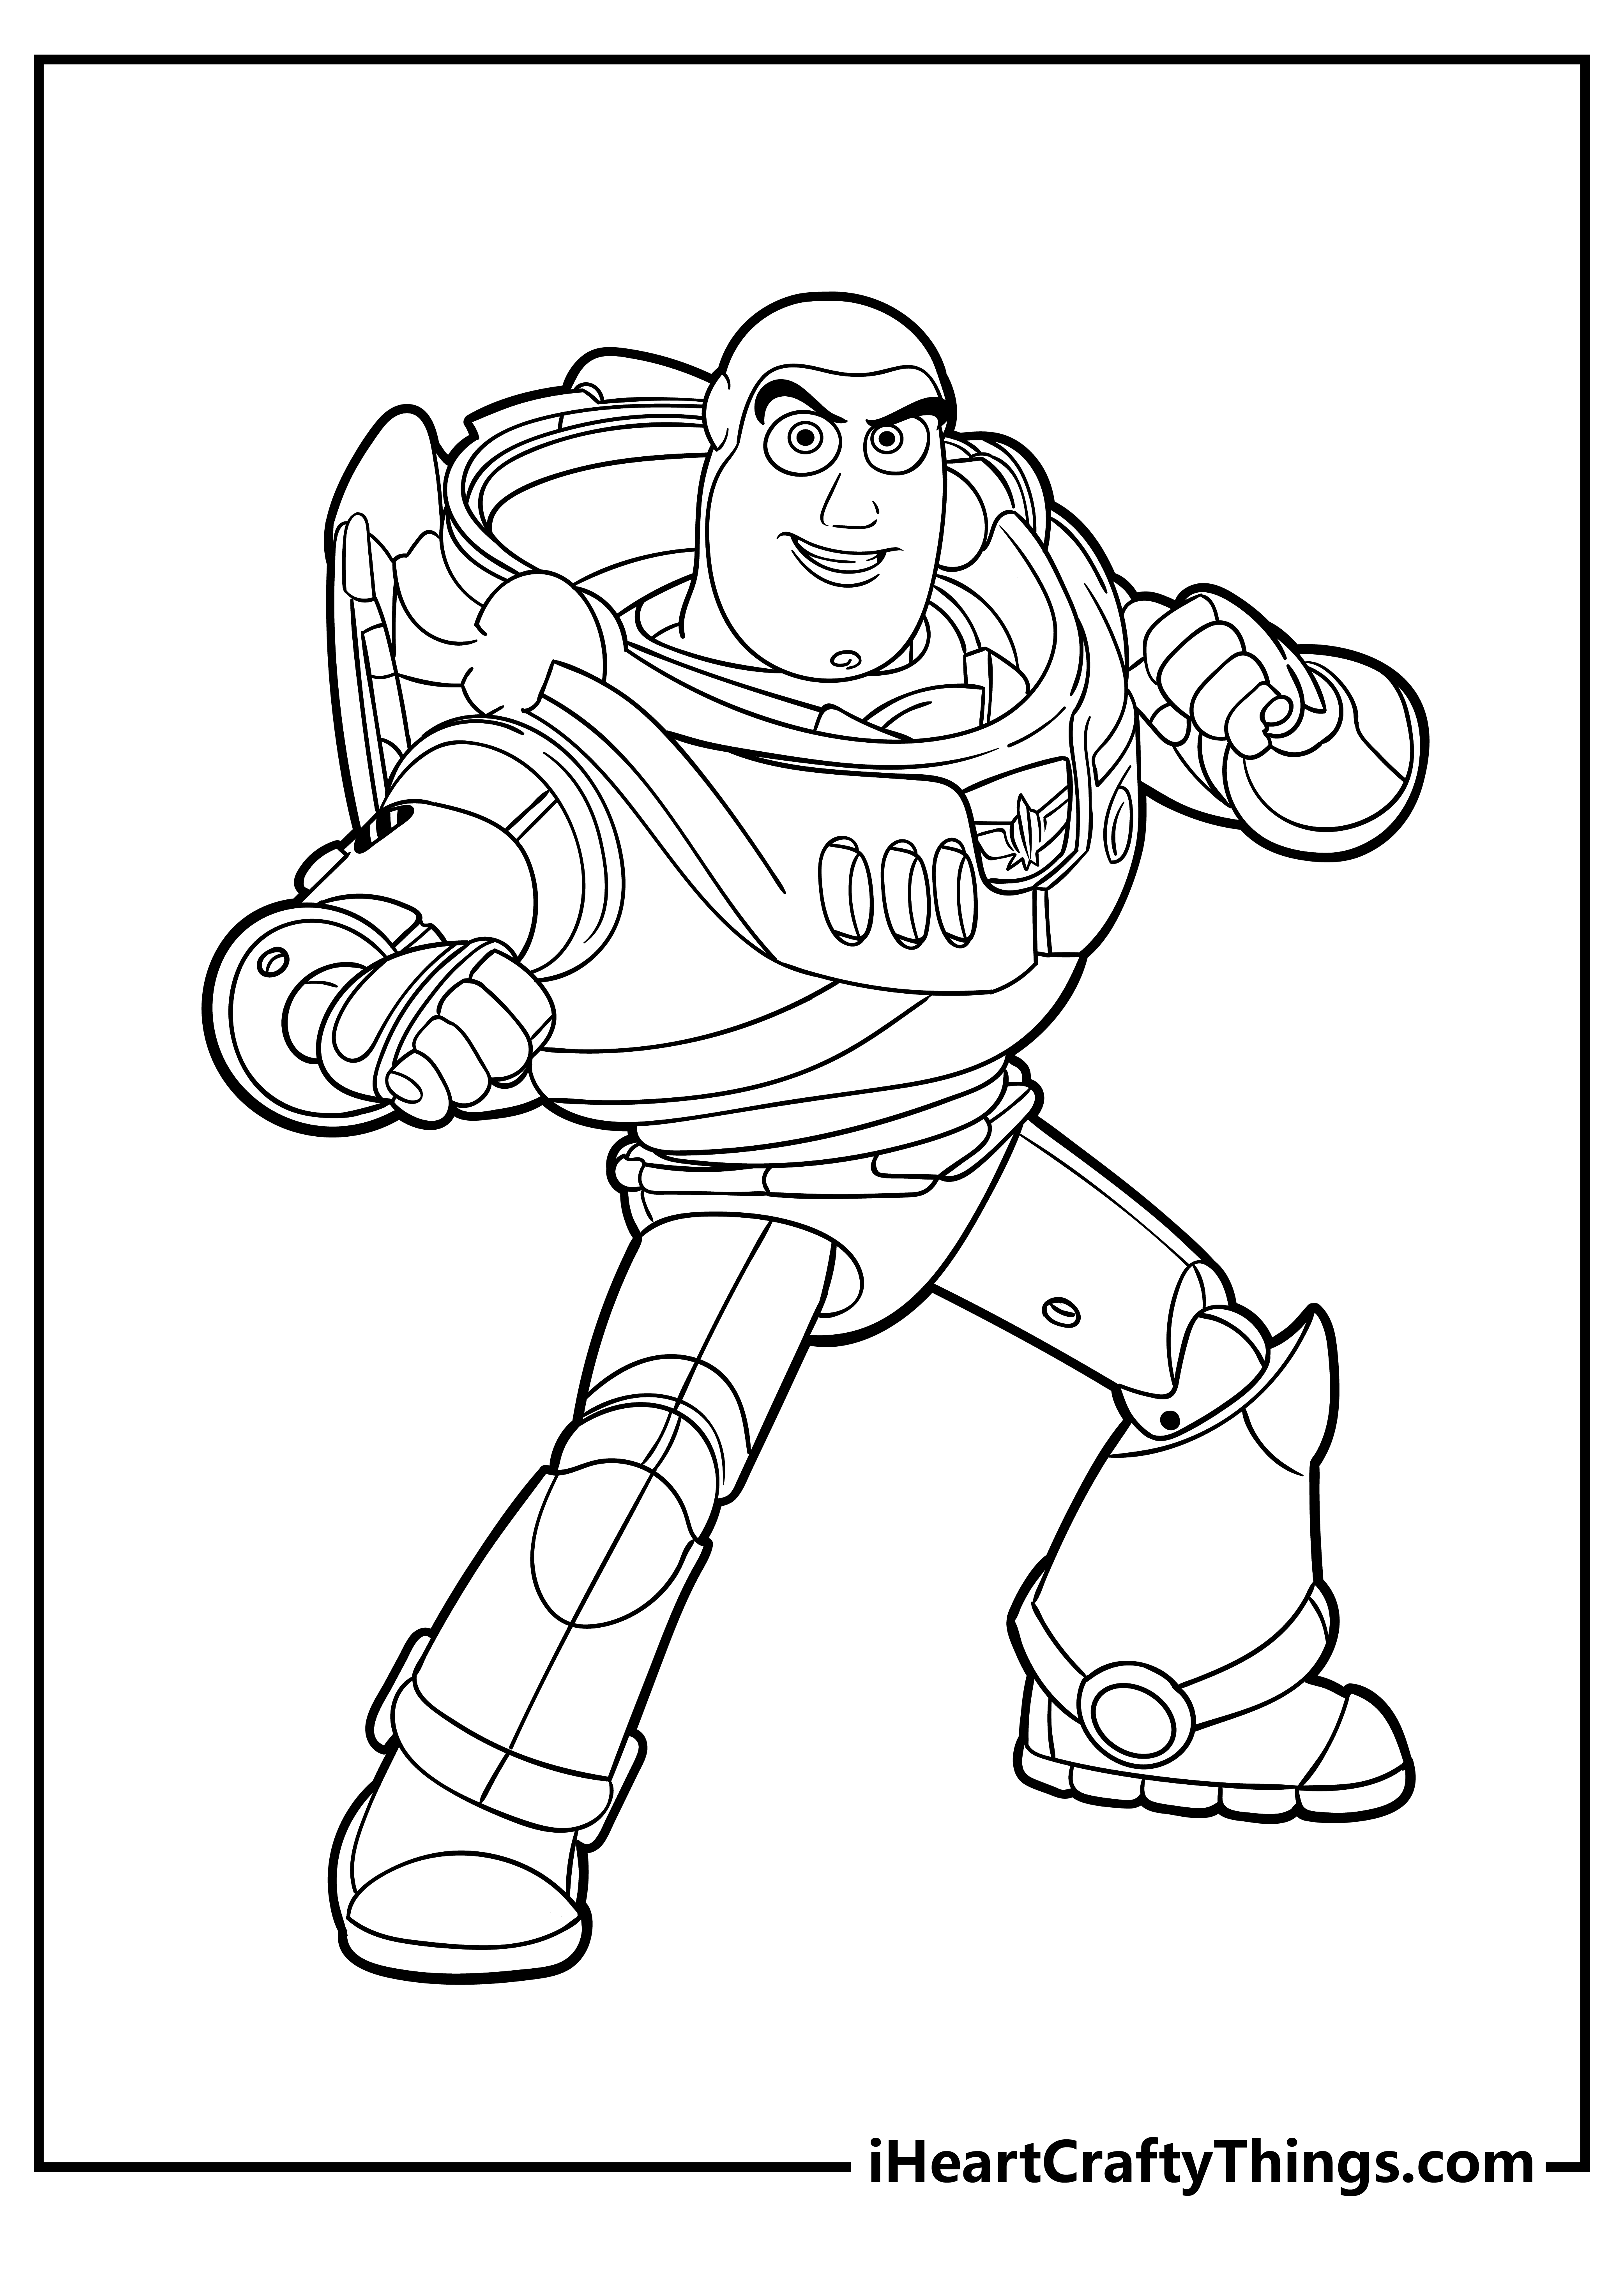 Toy Story Easy Coloring Pages